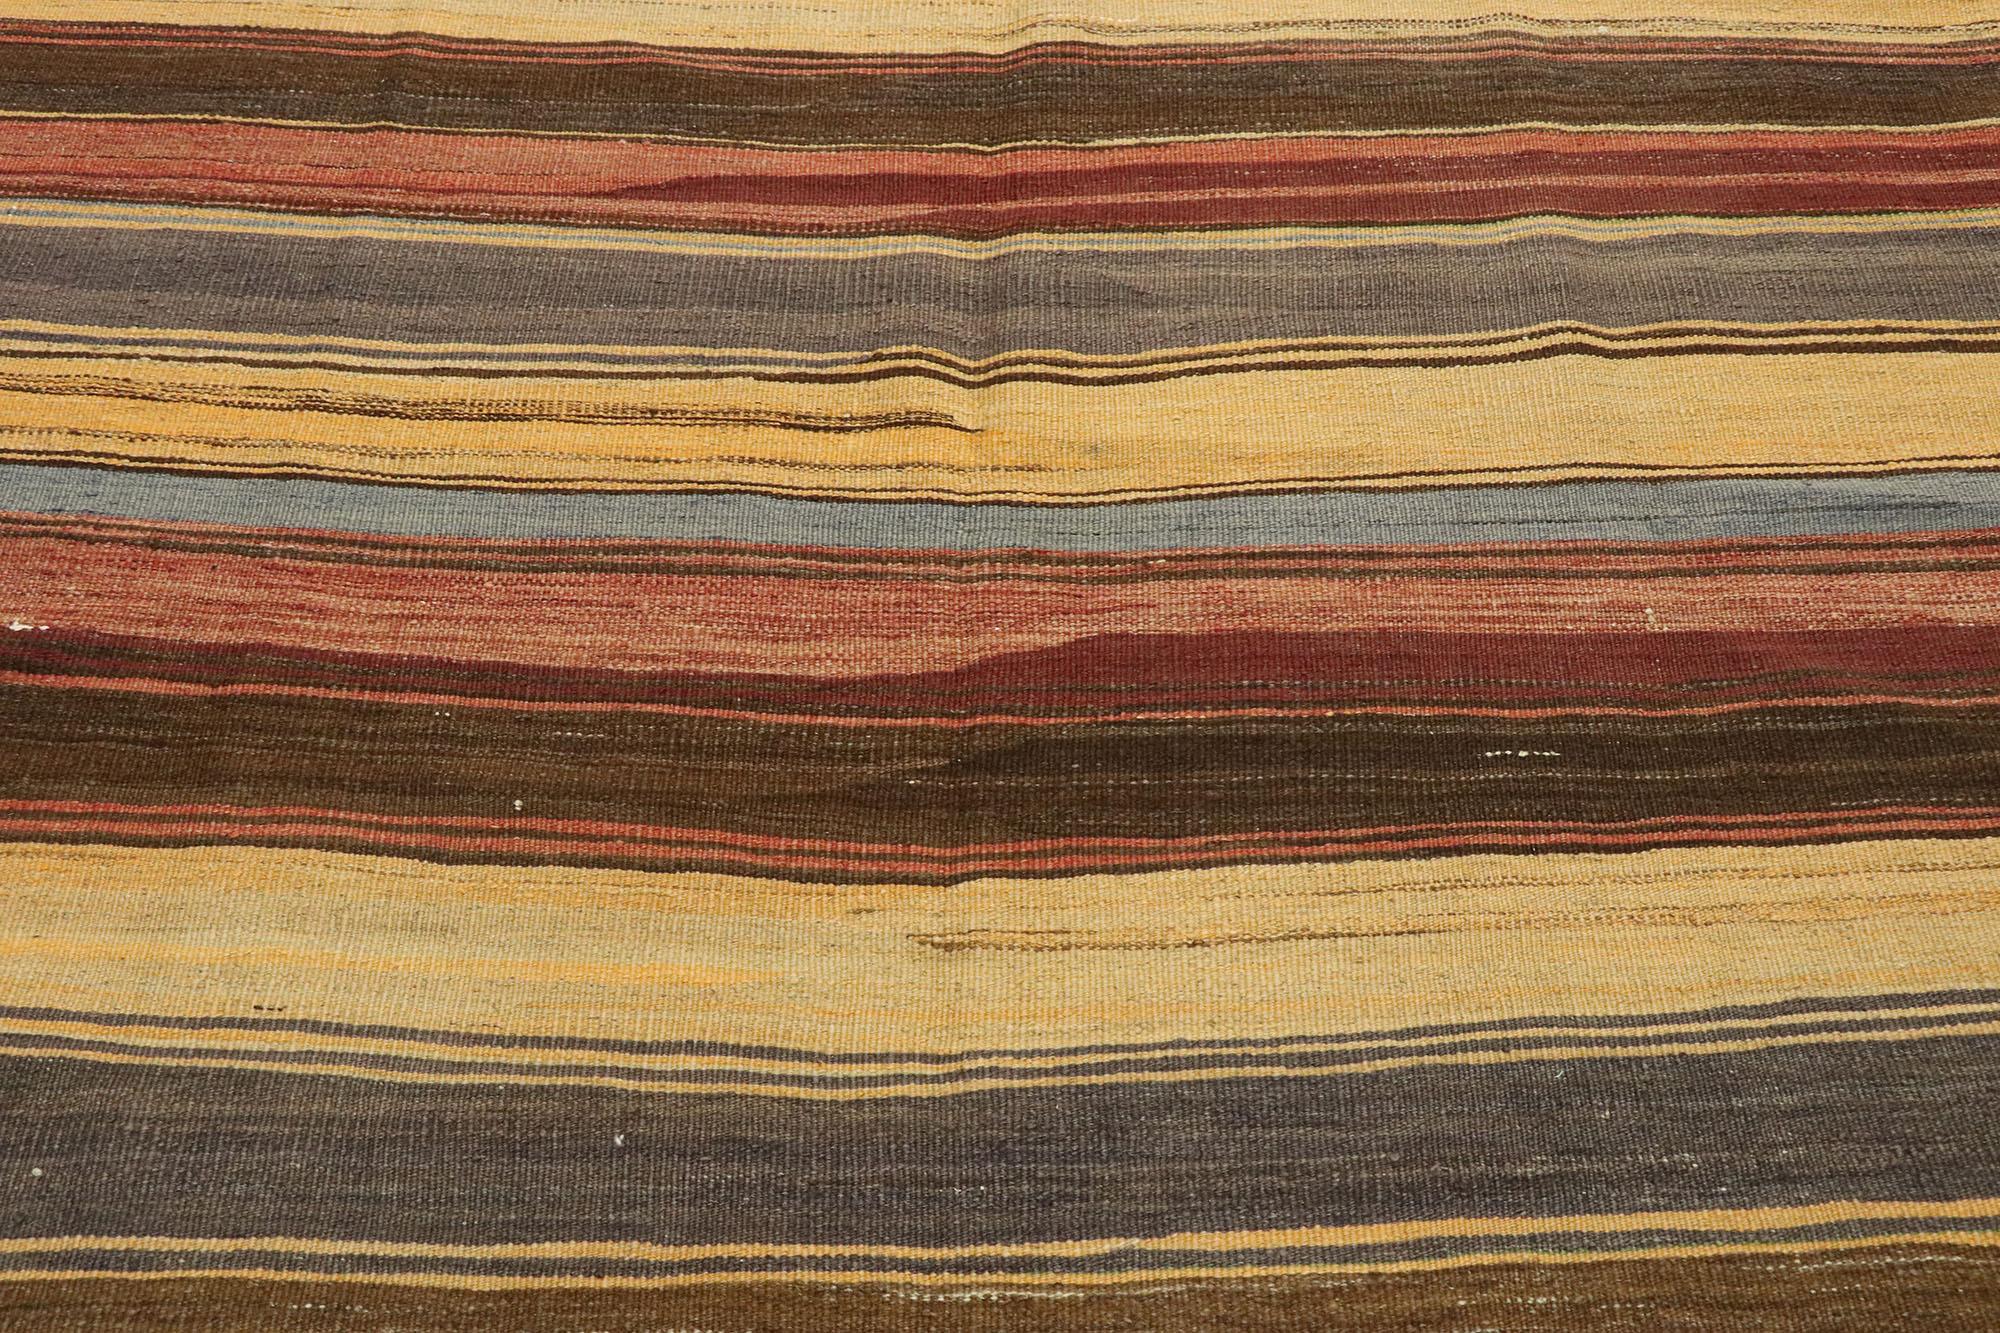 Hand-Woven Vintage Turkish Striped Kilim Rug with Modern Rustic Cabin Style